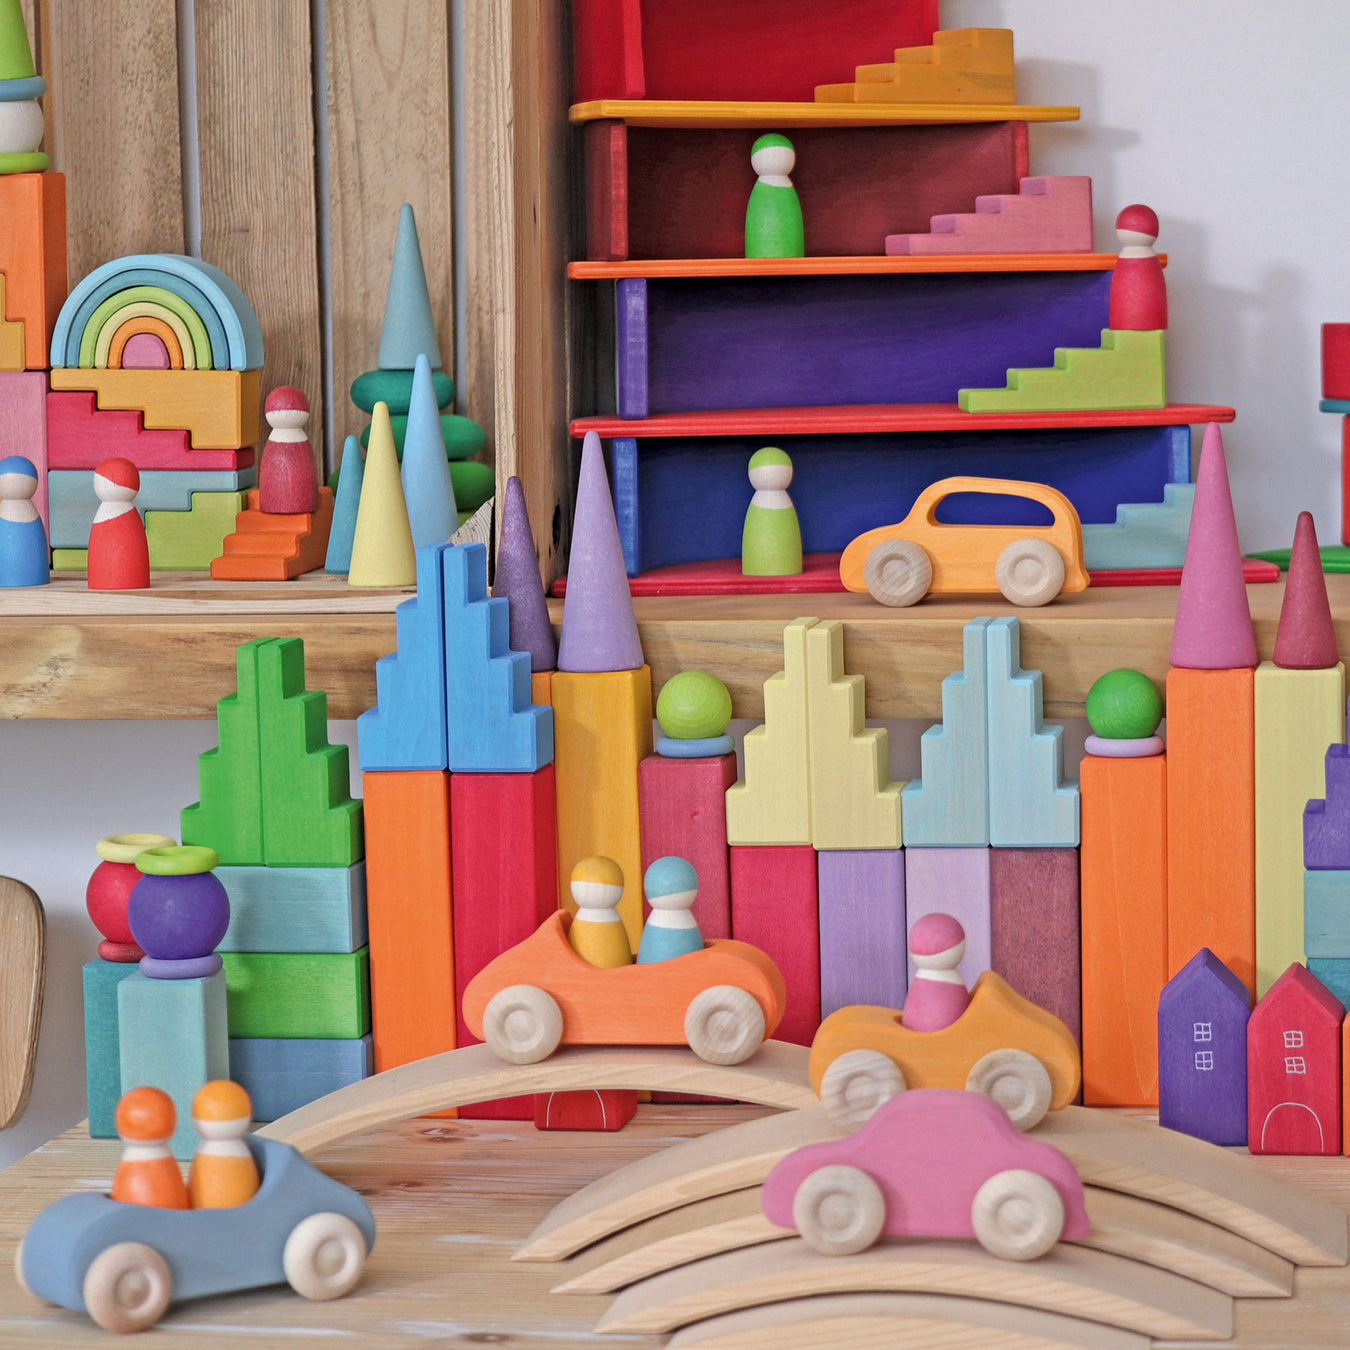 Display of grimms wooden toys showing rainbow, cars, and building blocks